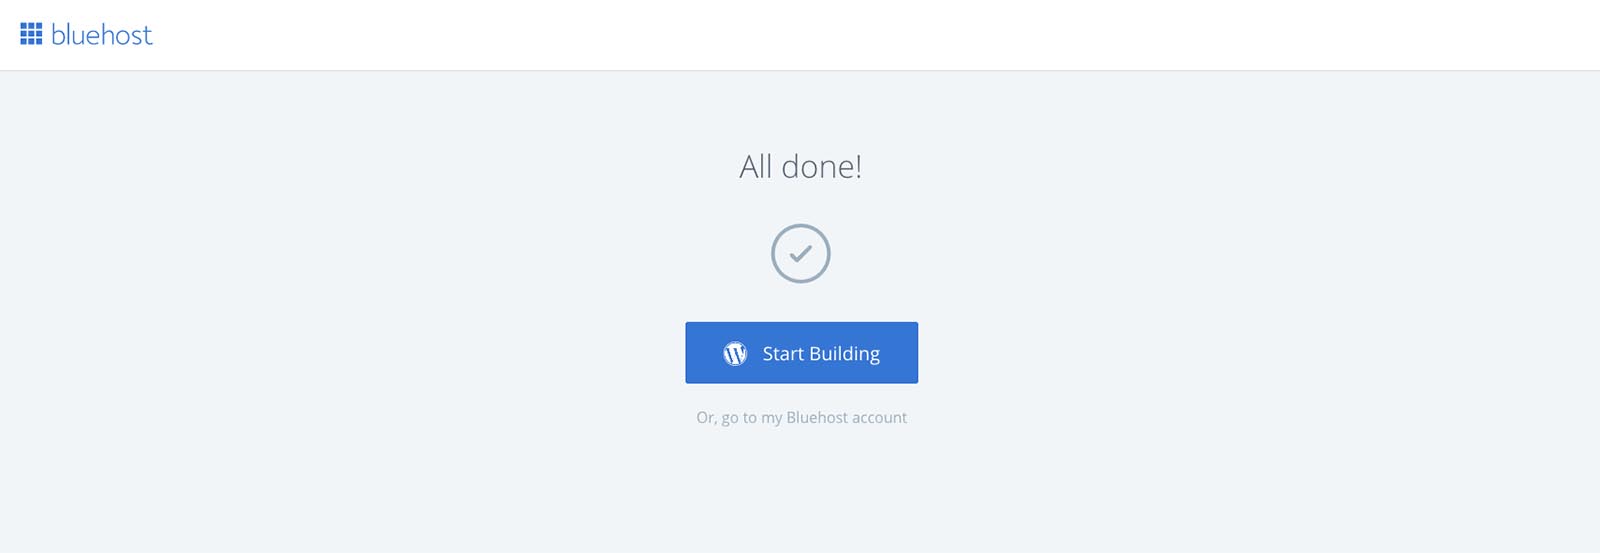 How to start a WordPress blog with Bluehost - Start building your awesome WordPress blog